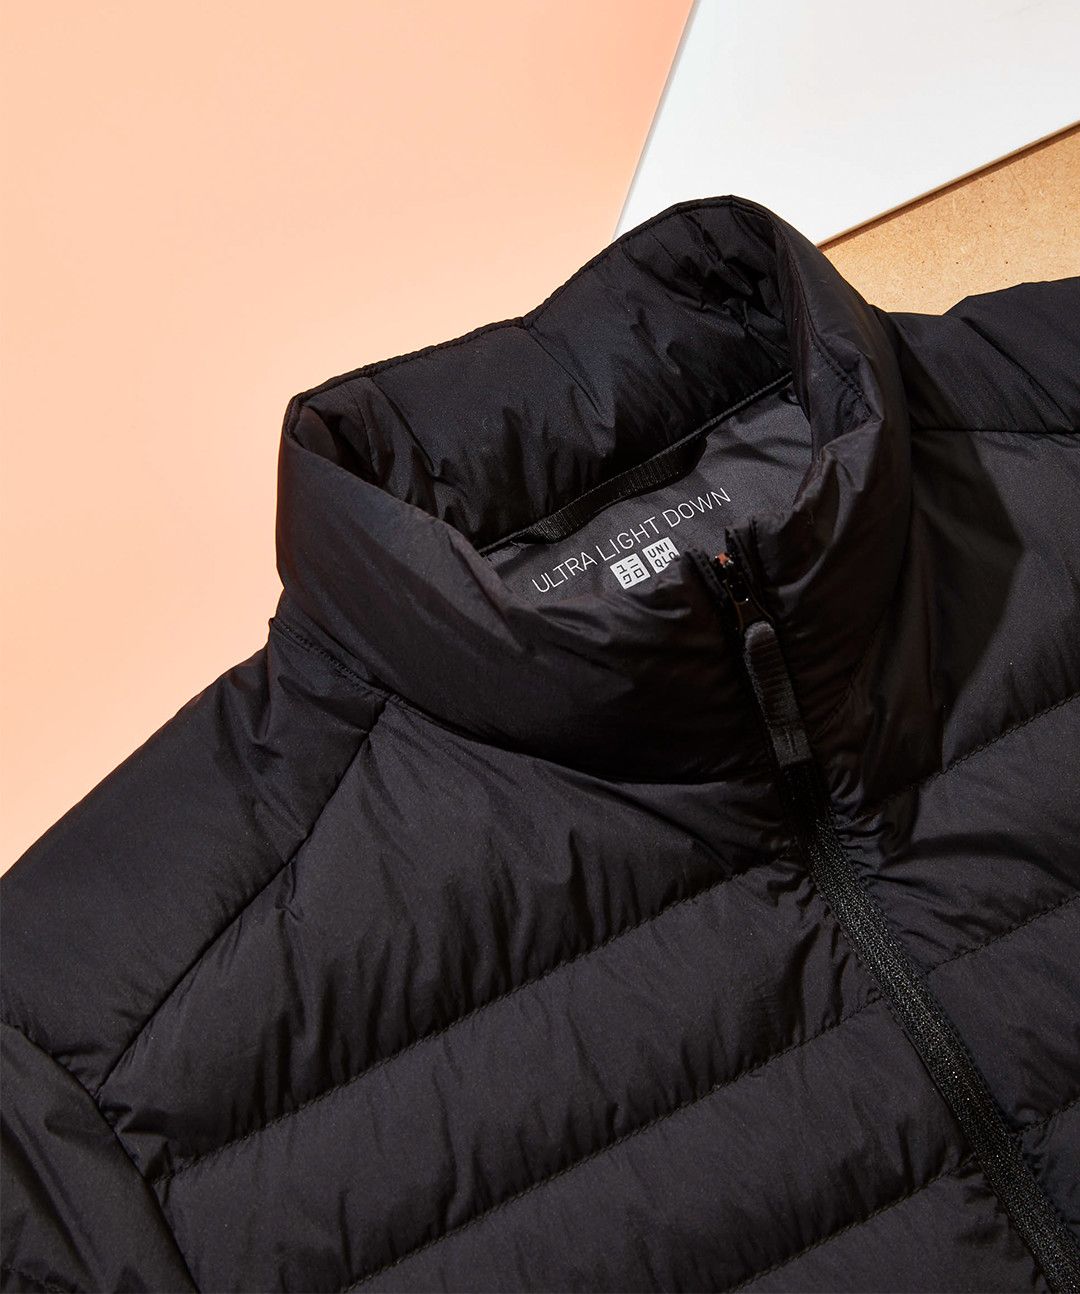 Uniqlo Ultralight Down Jacket Review | Packing Less